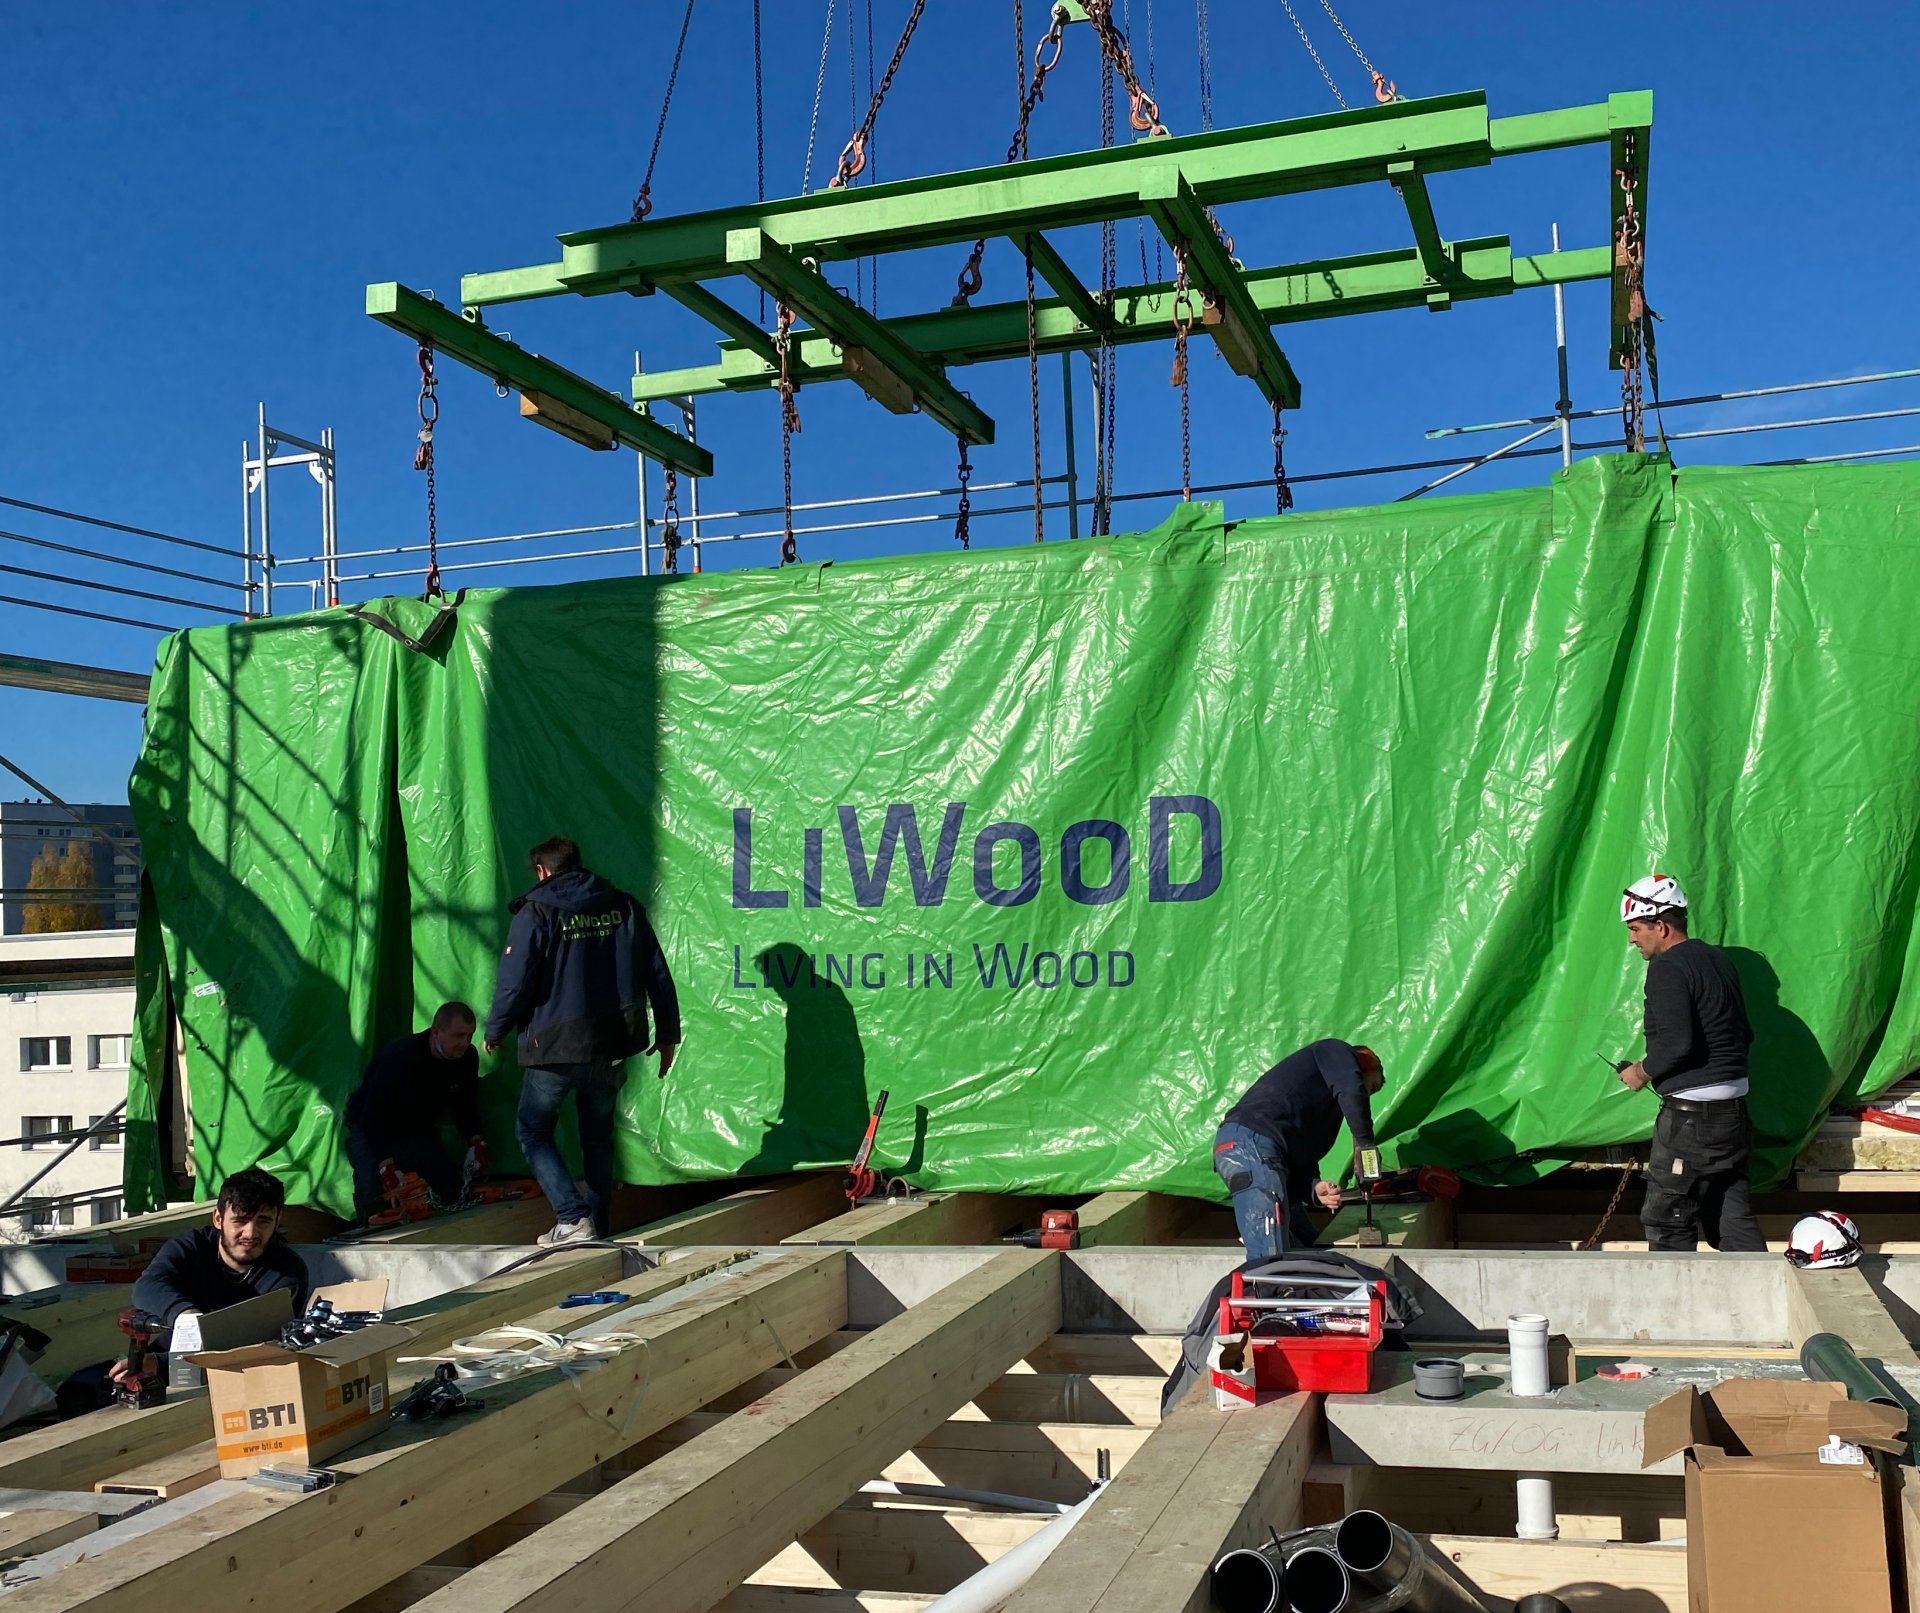 Several men working on a construction site in nice weather. In the background, there is a green tarpaulin with the inscription ‘Living in Wood’.